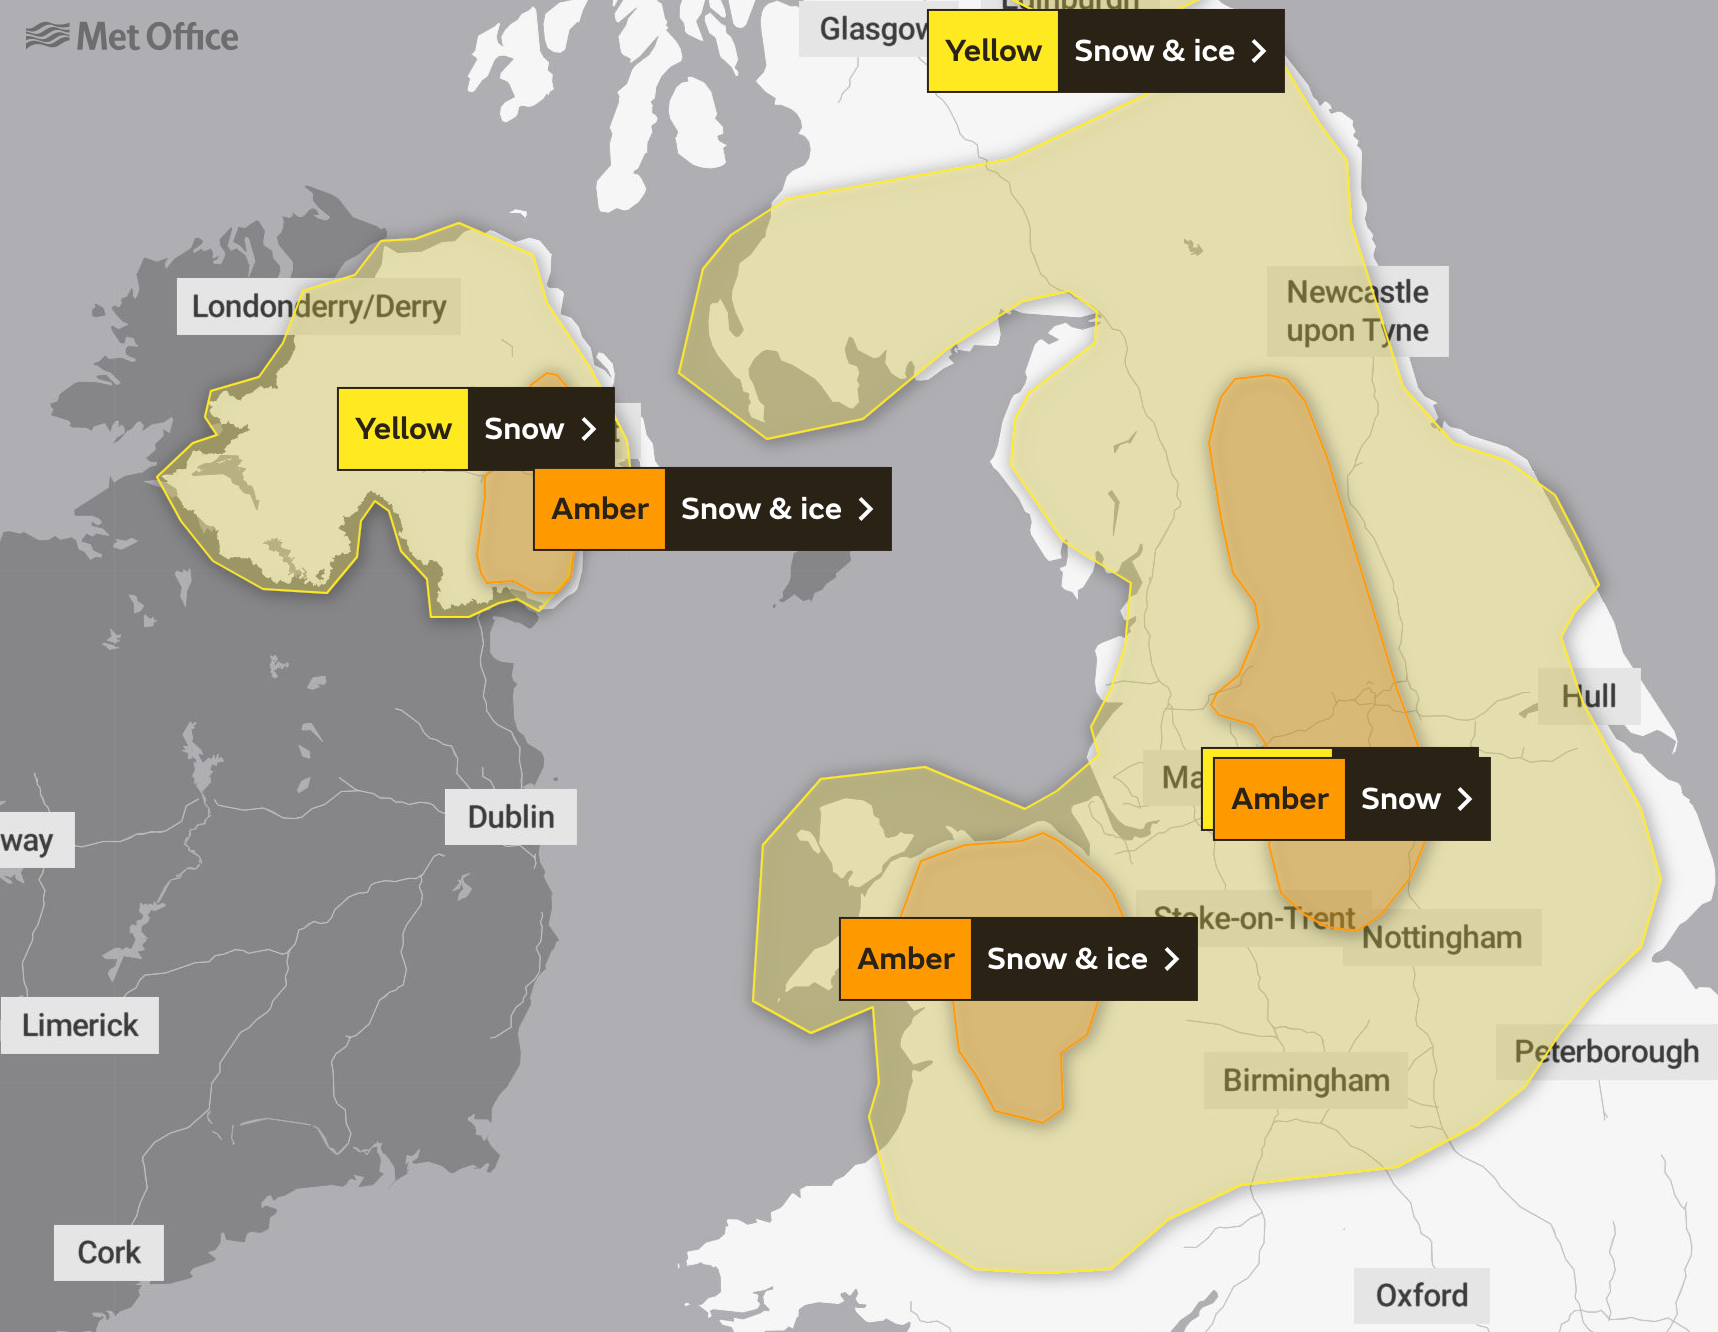 Yellow and amber warnings issued across England and Wales for Friday 10th March